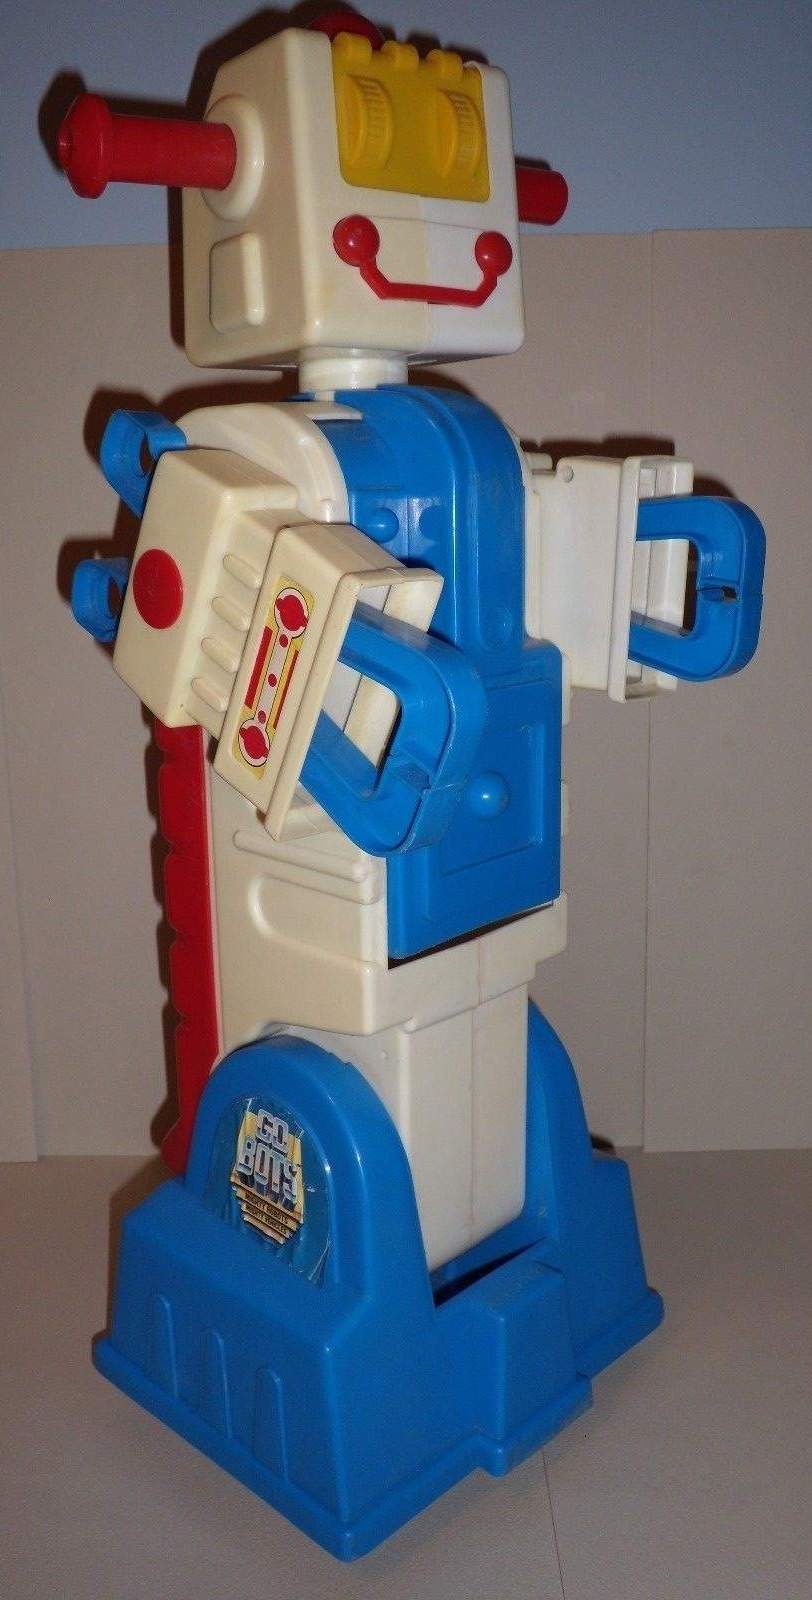 scooter gobots